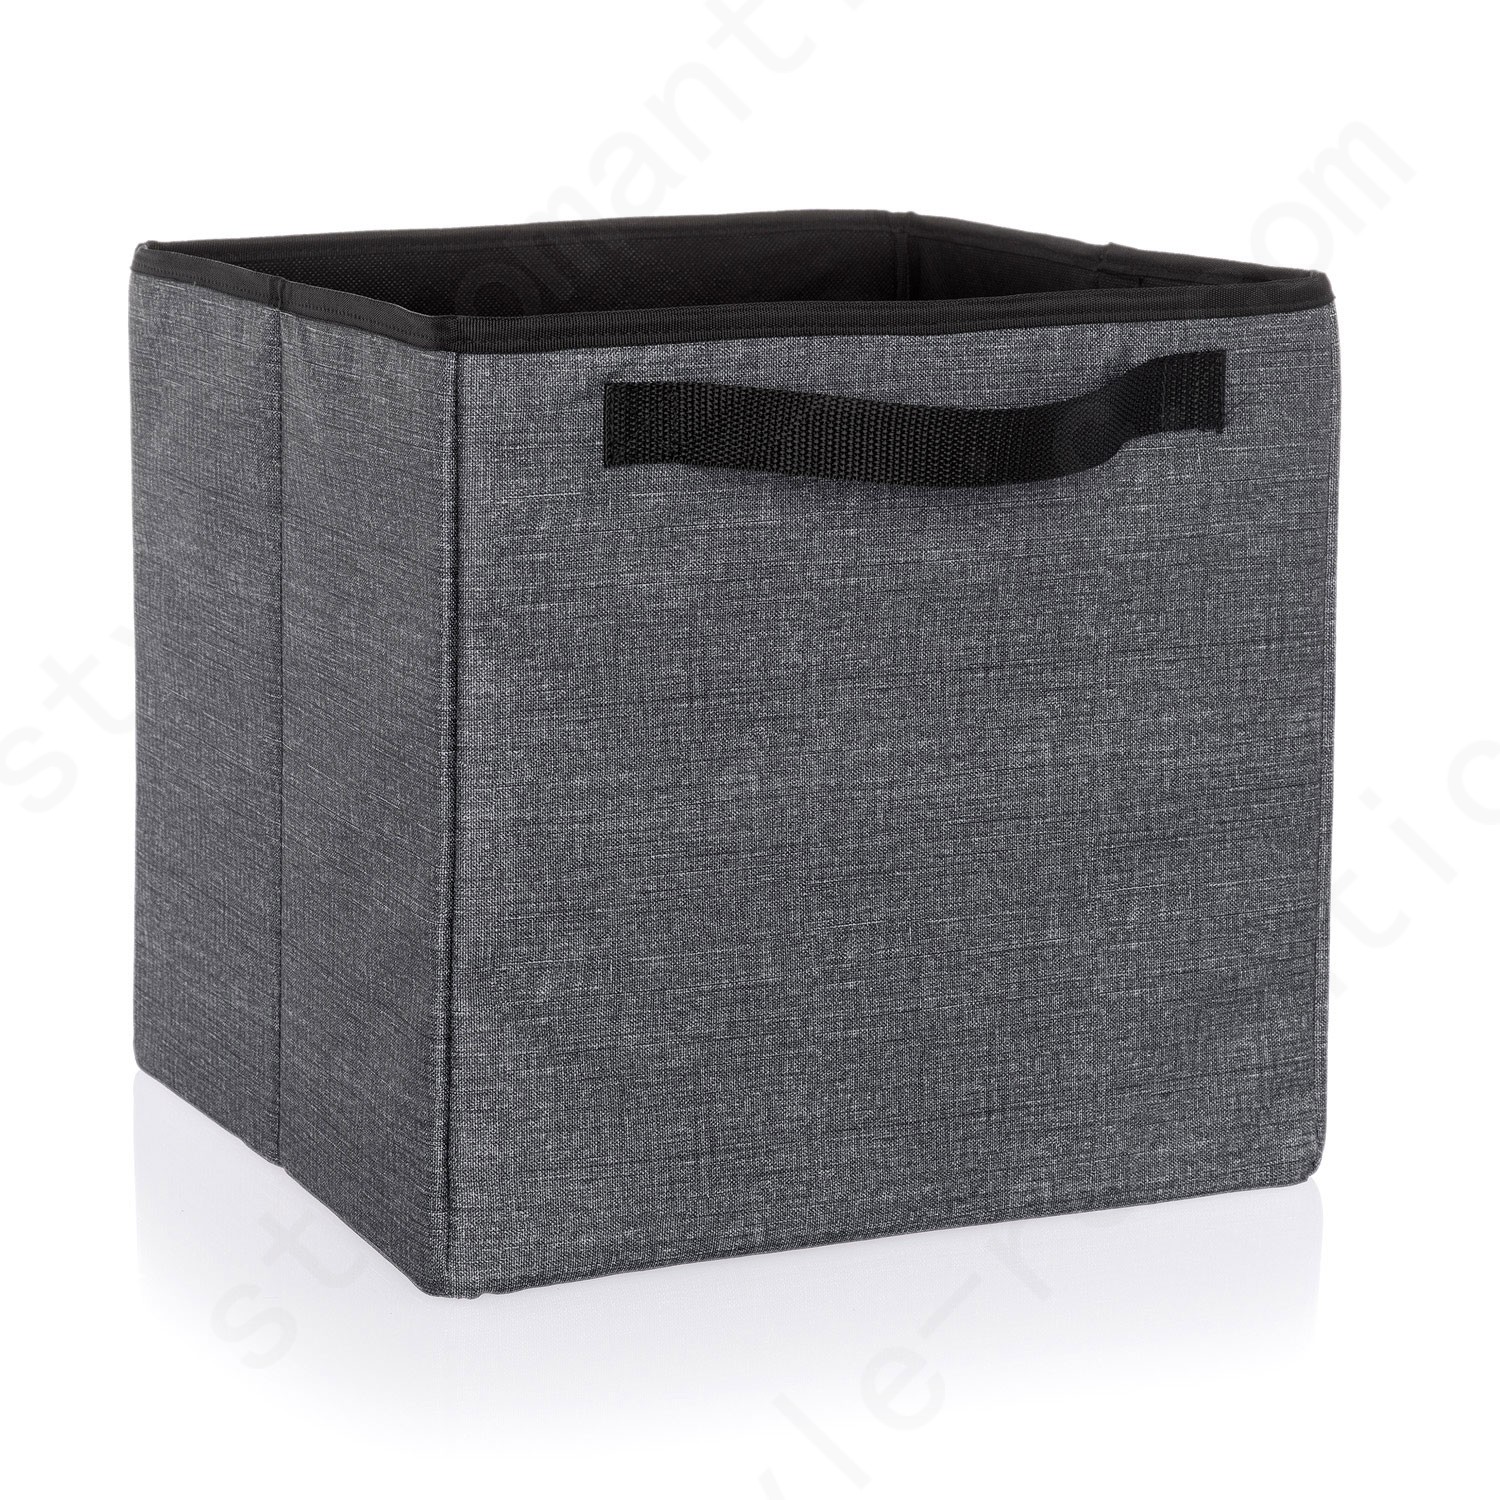 Thirty-One Gifts Your Way Cube - Charcoal Crosshatch W/ Chalk Panel - Thirty-One Gifts Your Way Cube - Charcoal Crosshatch W/ Chalk Panel